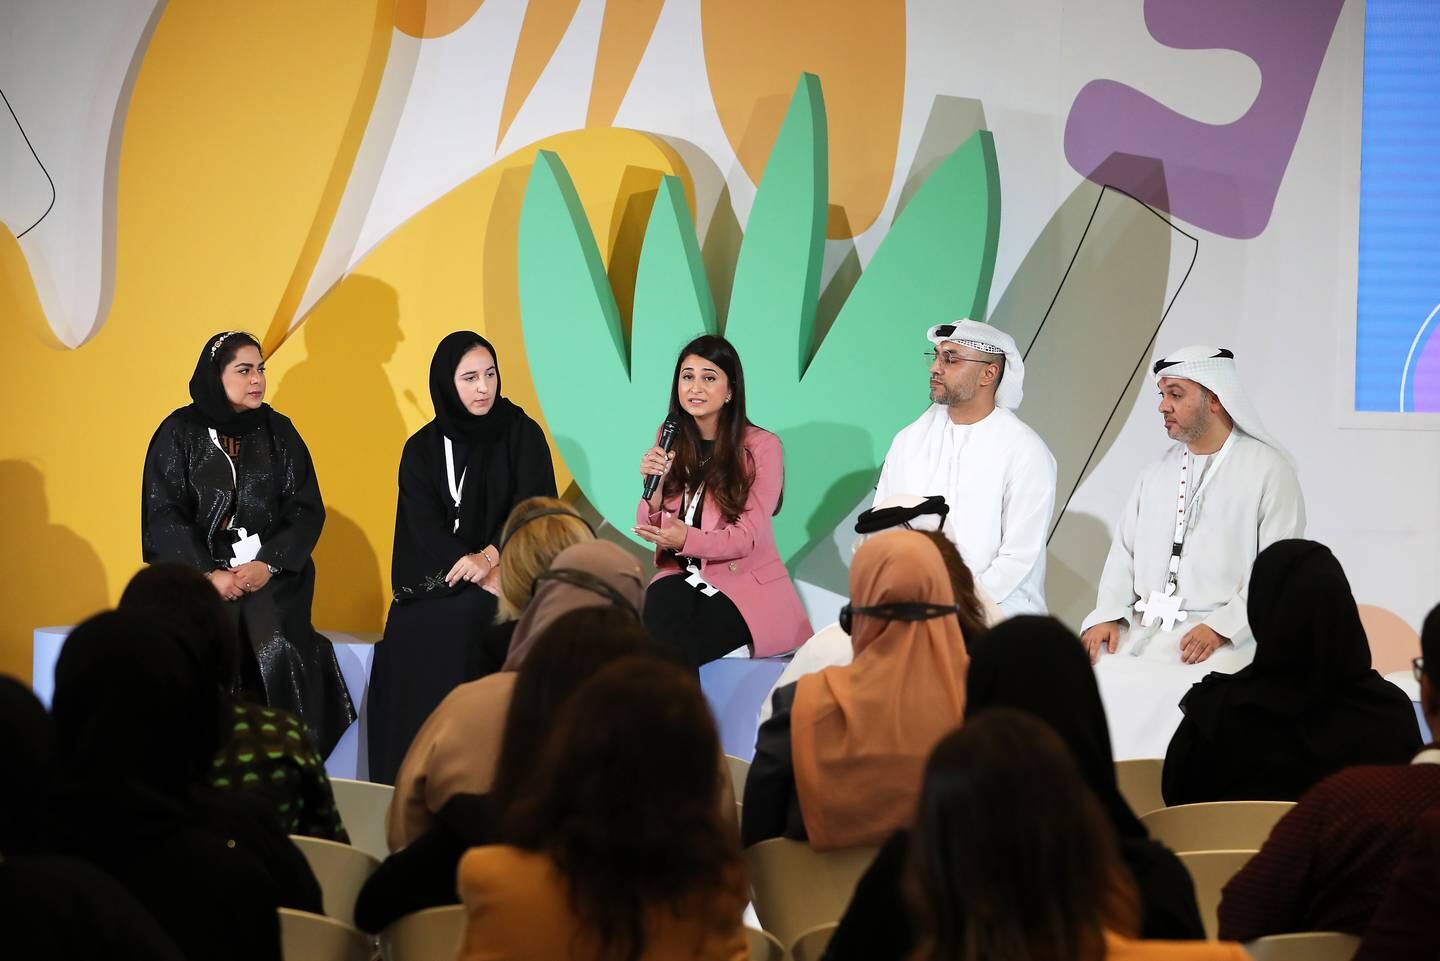 From left, Rasna Al Khamis, director of marketing and engagement at Emirates Nature - WWF; Nour Al Maskari of Masdar; Manal Awad of HSBC; Mohamed Al Mansoori of Etihad Airways; and Ahmed Lari of Abu Dhabi Motorsports Management at the launch event at Yas Conference Centre at Yas Marina Circuit. These companies won the label last year. Pawan Singh / The National